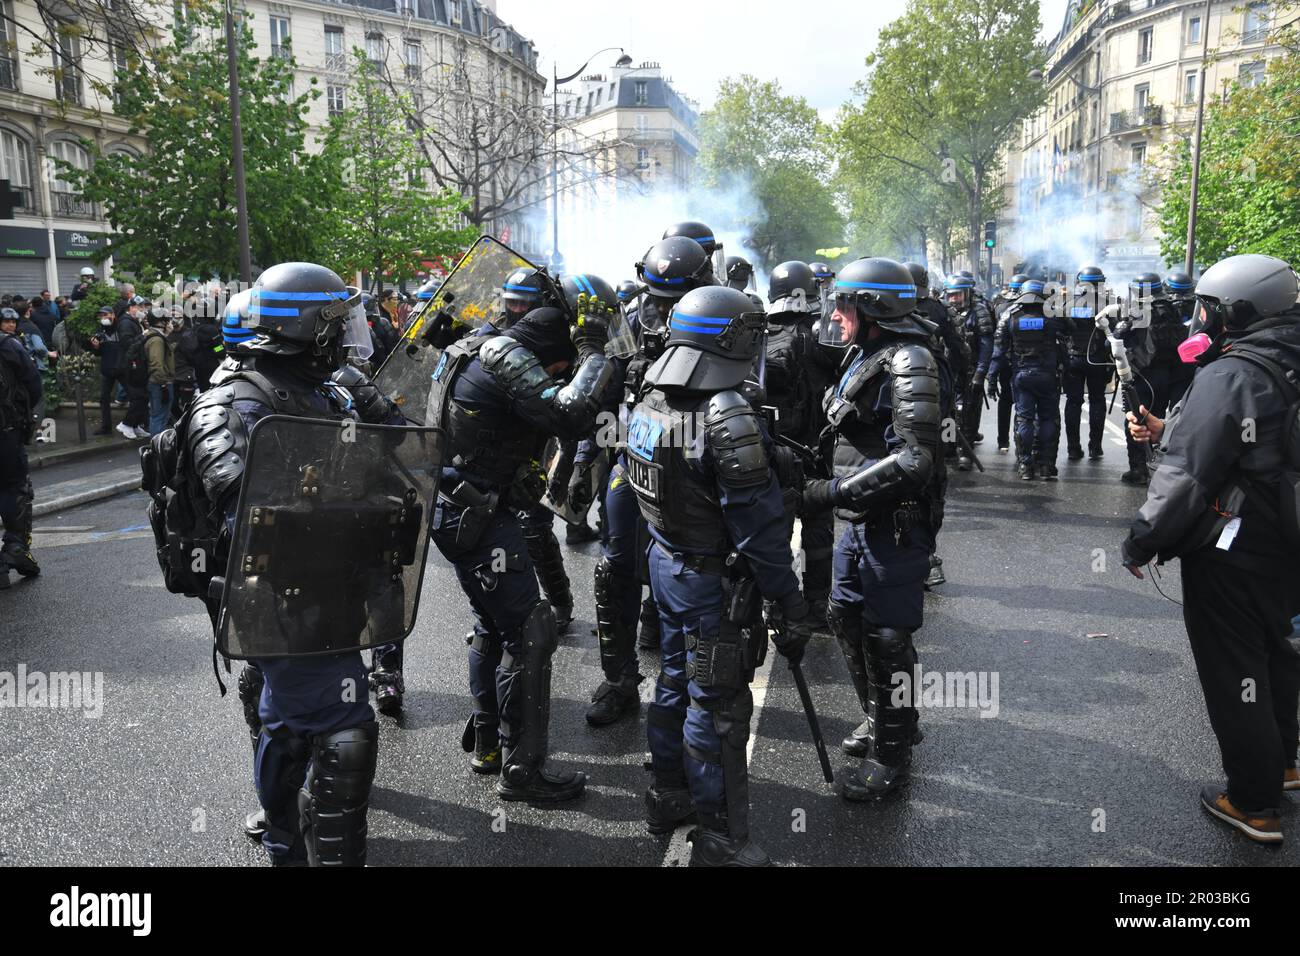 Paris,France,1st May 2023.International workers day. Thousands of people protested and celebrated on may-day in Paris.   Labour unions,workers,students and others marched through the streets,protesting the new pension system and more. Some protesters turned violent, started fires and destroyed businesses. The police used teargas and a water cannon  against the rioters. Stock Photo